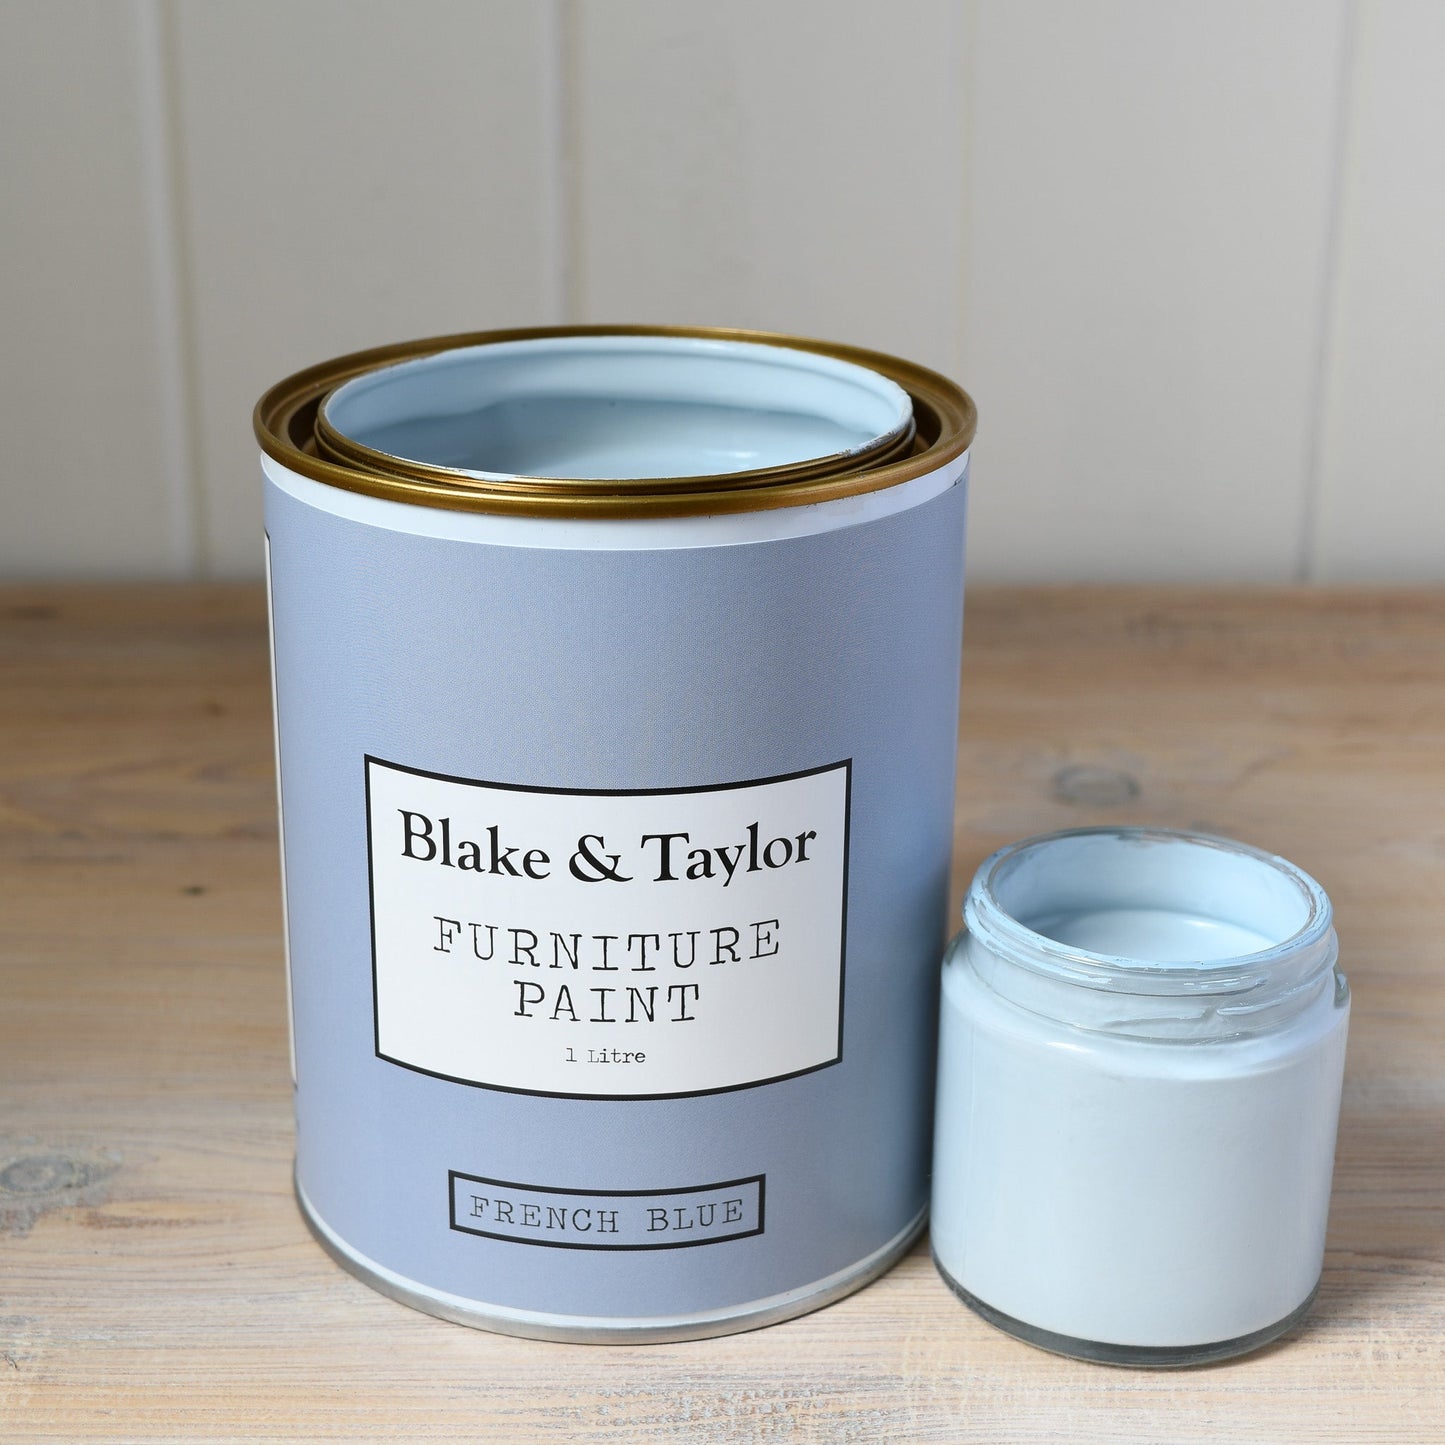 1 litre tin and 120ml pot of Blake & Taylor French BlueChalk Furniture Paint